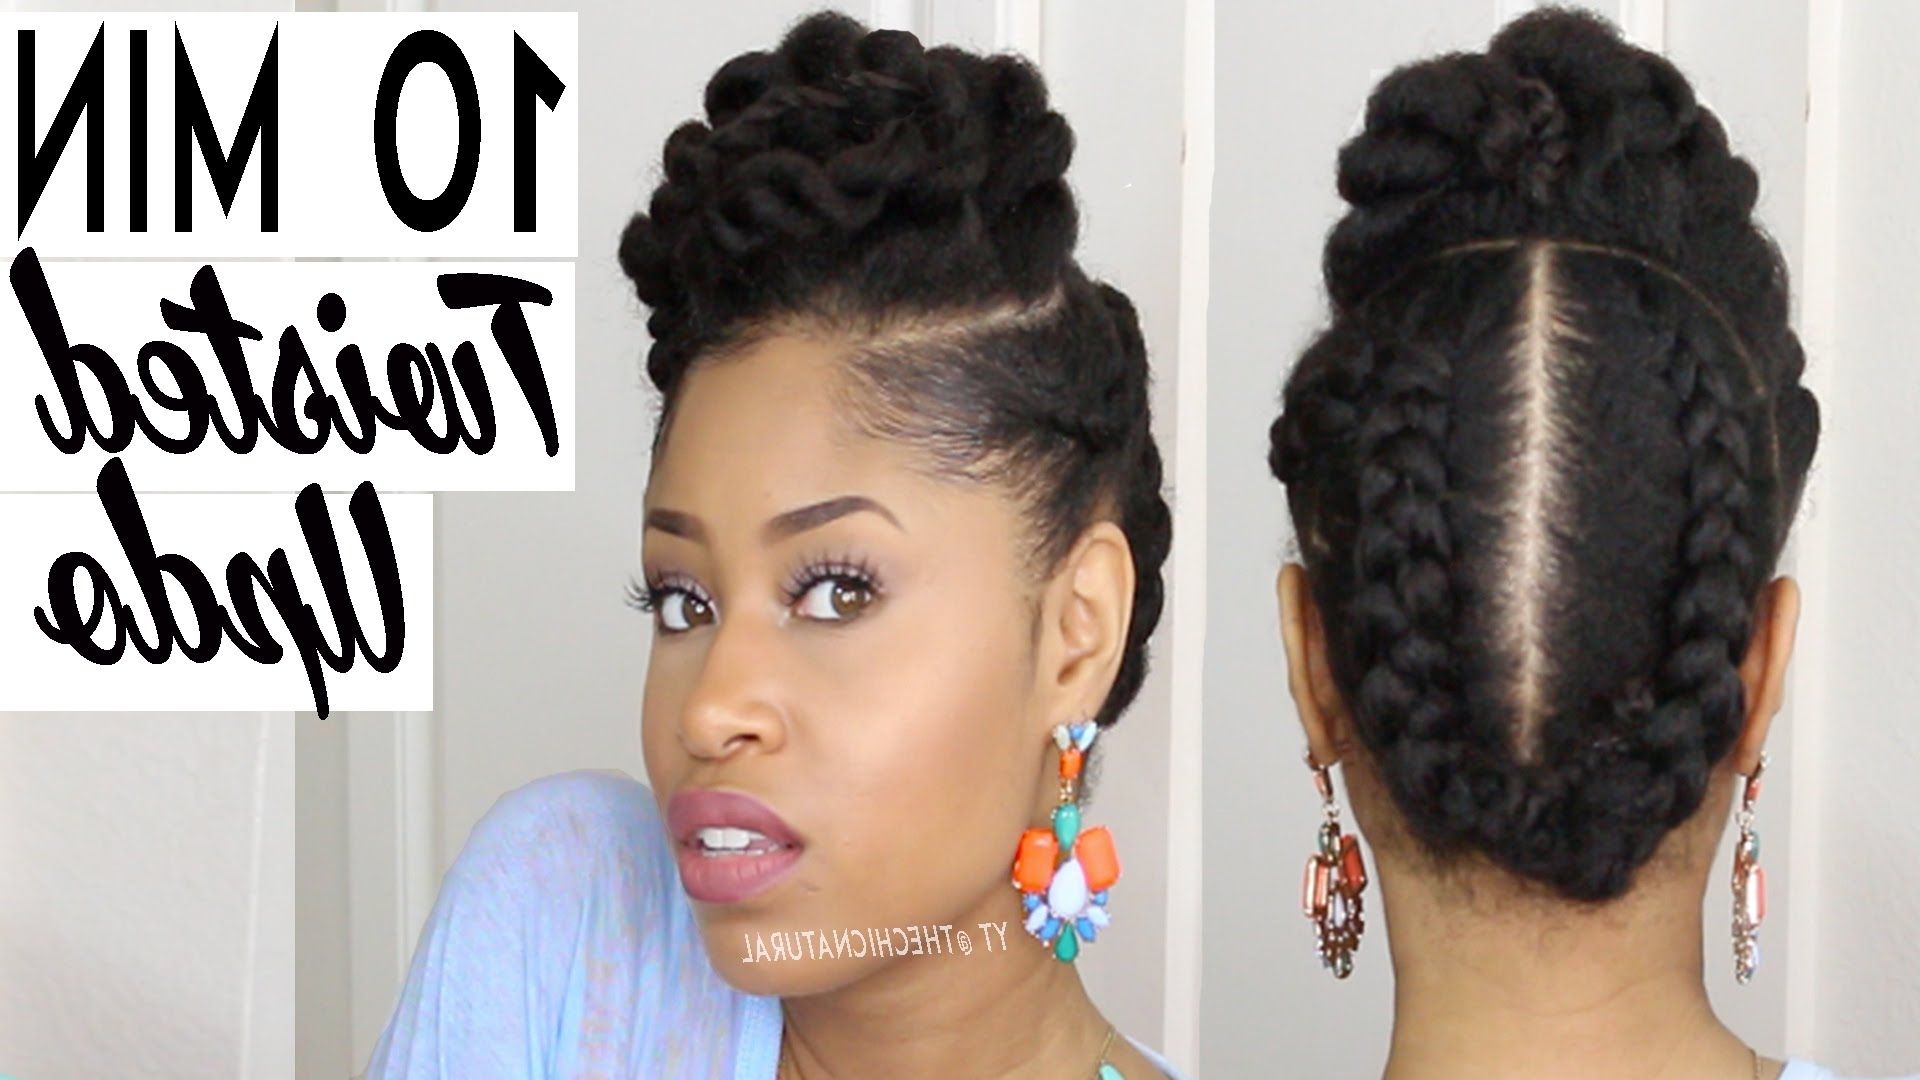 The 10 Minute Twisted Updo | Natural Hairstyle – Youtube Throughout Black Natural Updo Hairstyles (View 1 of 15)